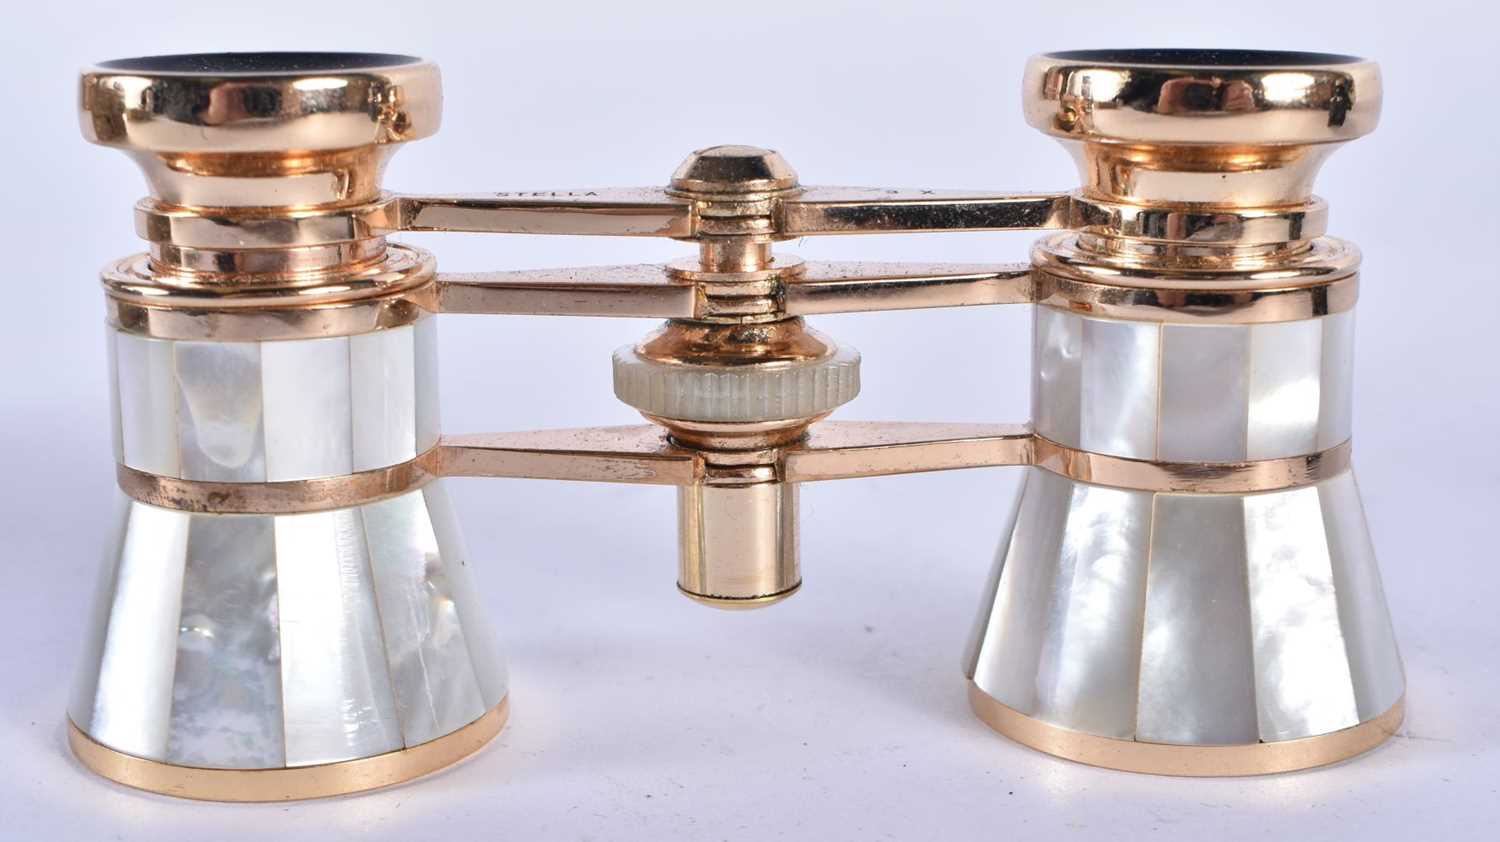 A PAIR OF MOTHER OF PEARL OPERA GLASSES. 8 cm x 6 cm. - Image 3 of 5